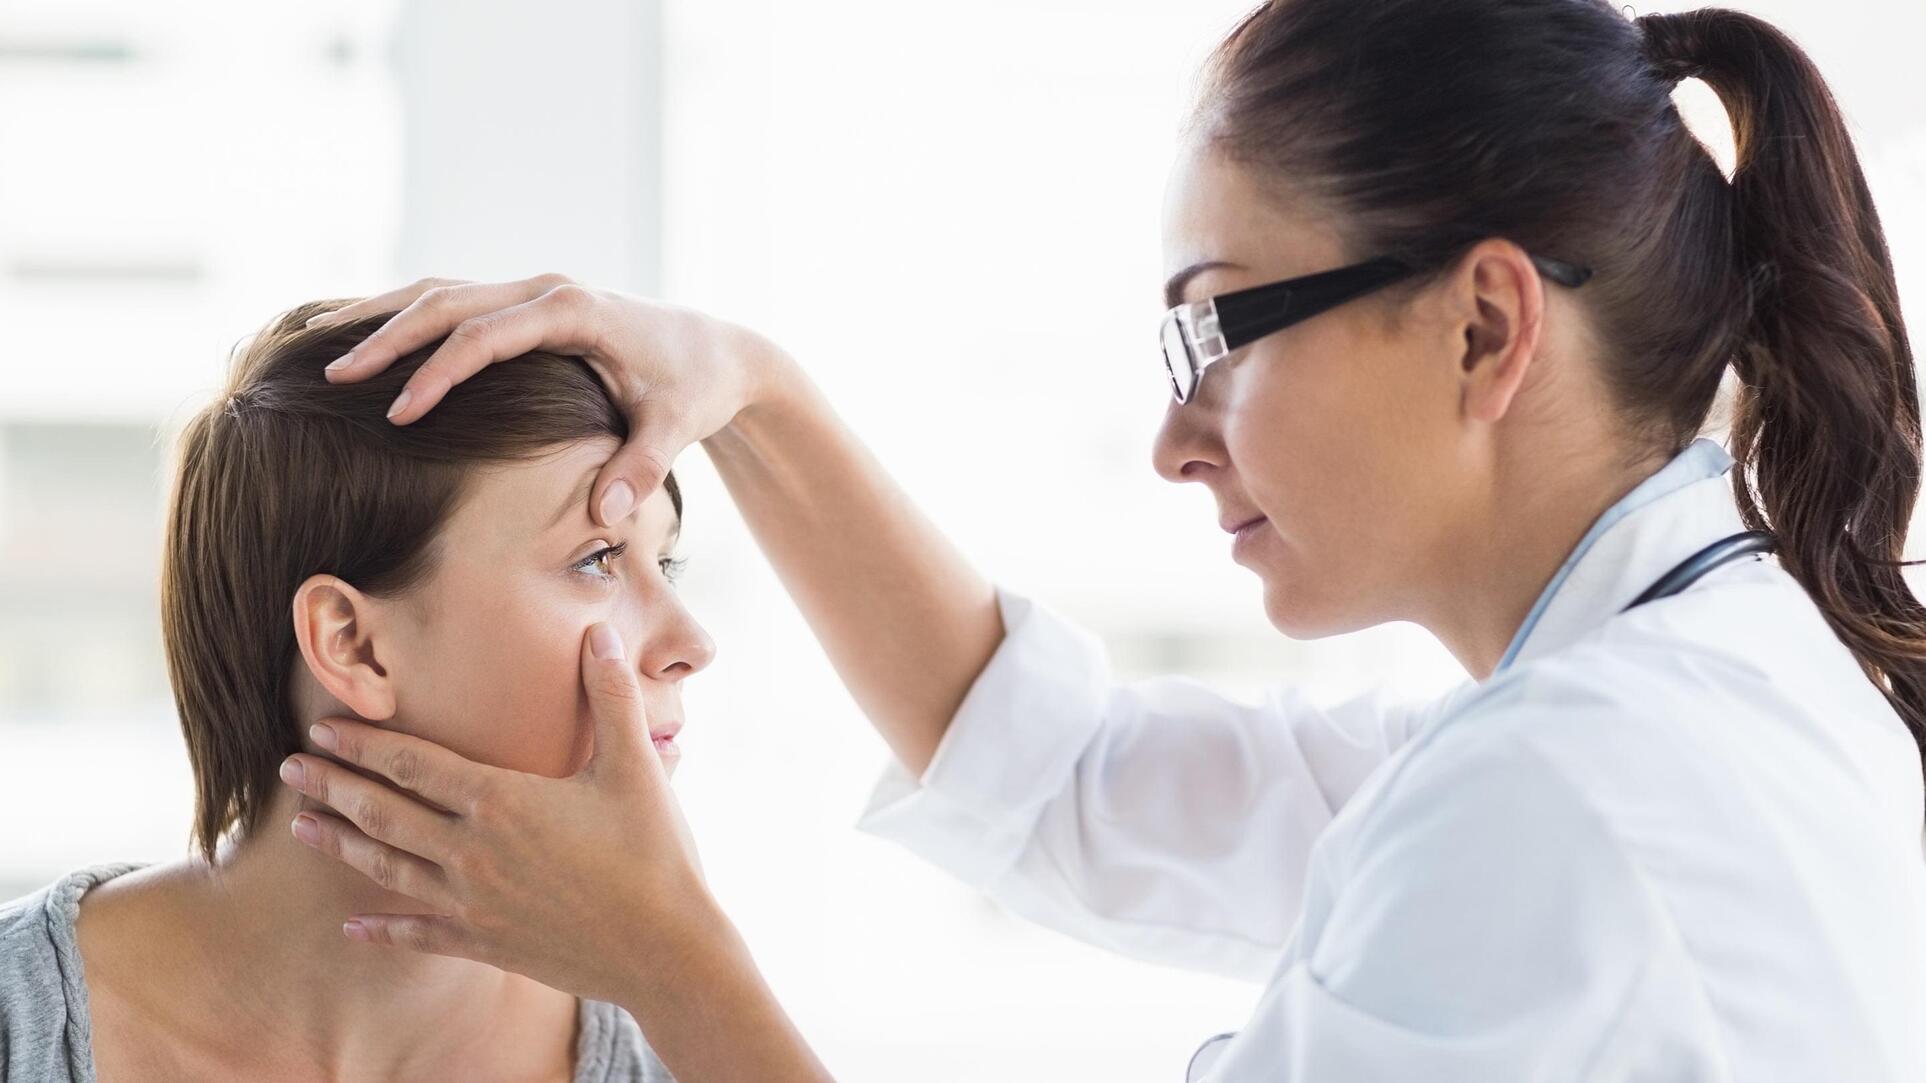 Ophthalmologists are medical doctors who specialize in the diagnosis and treatment of eye conditions.